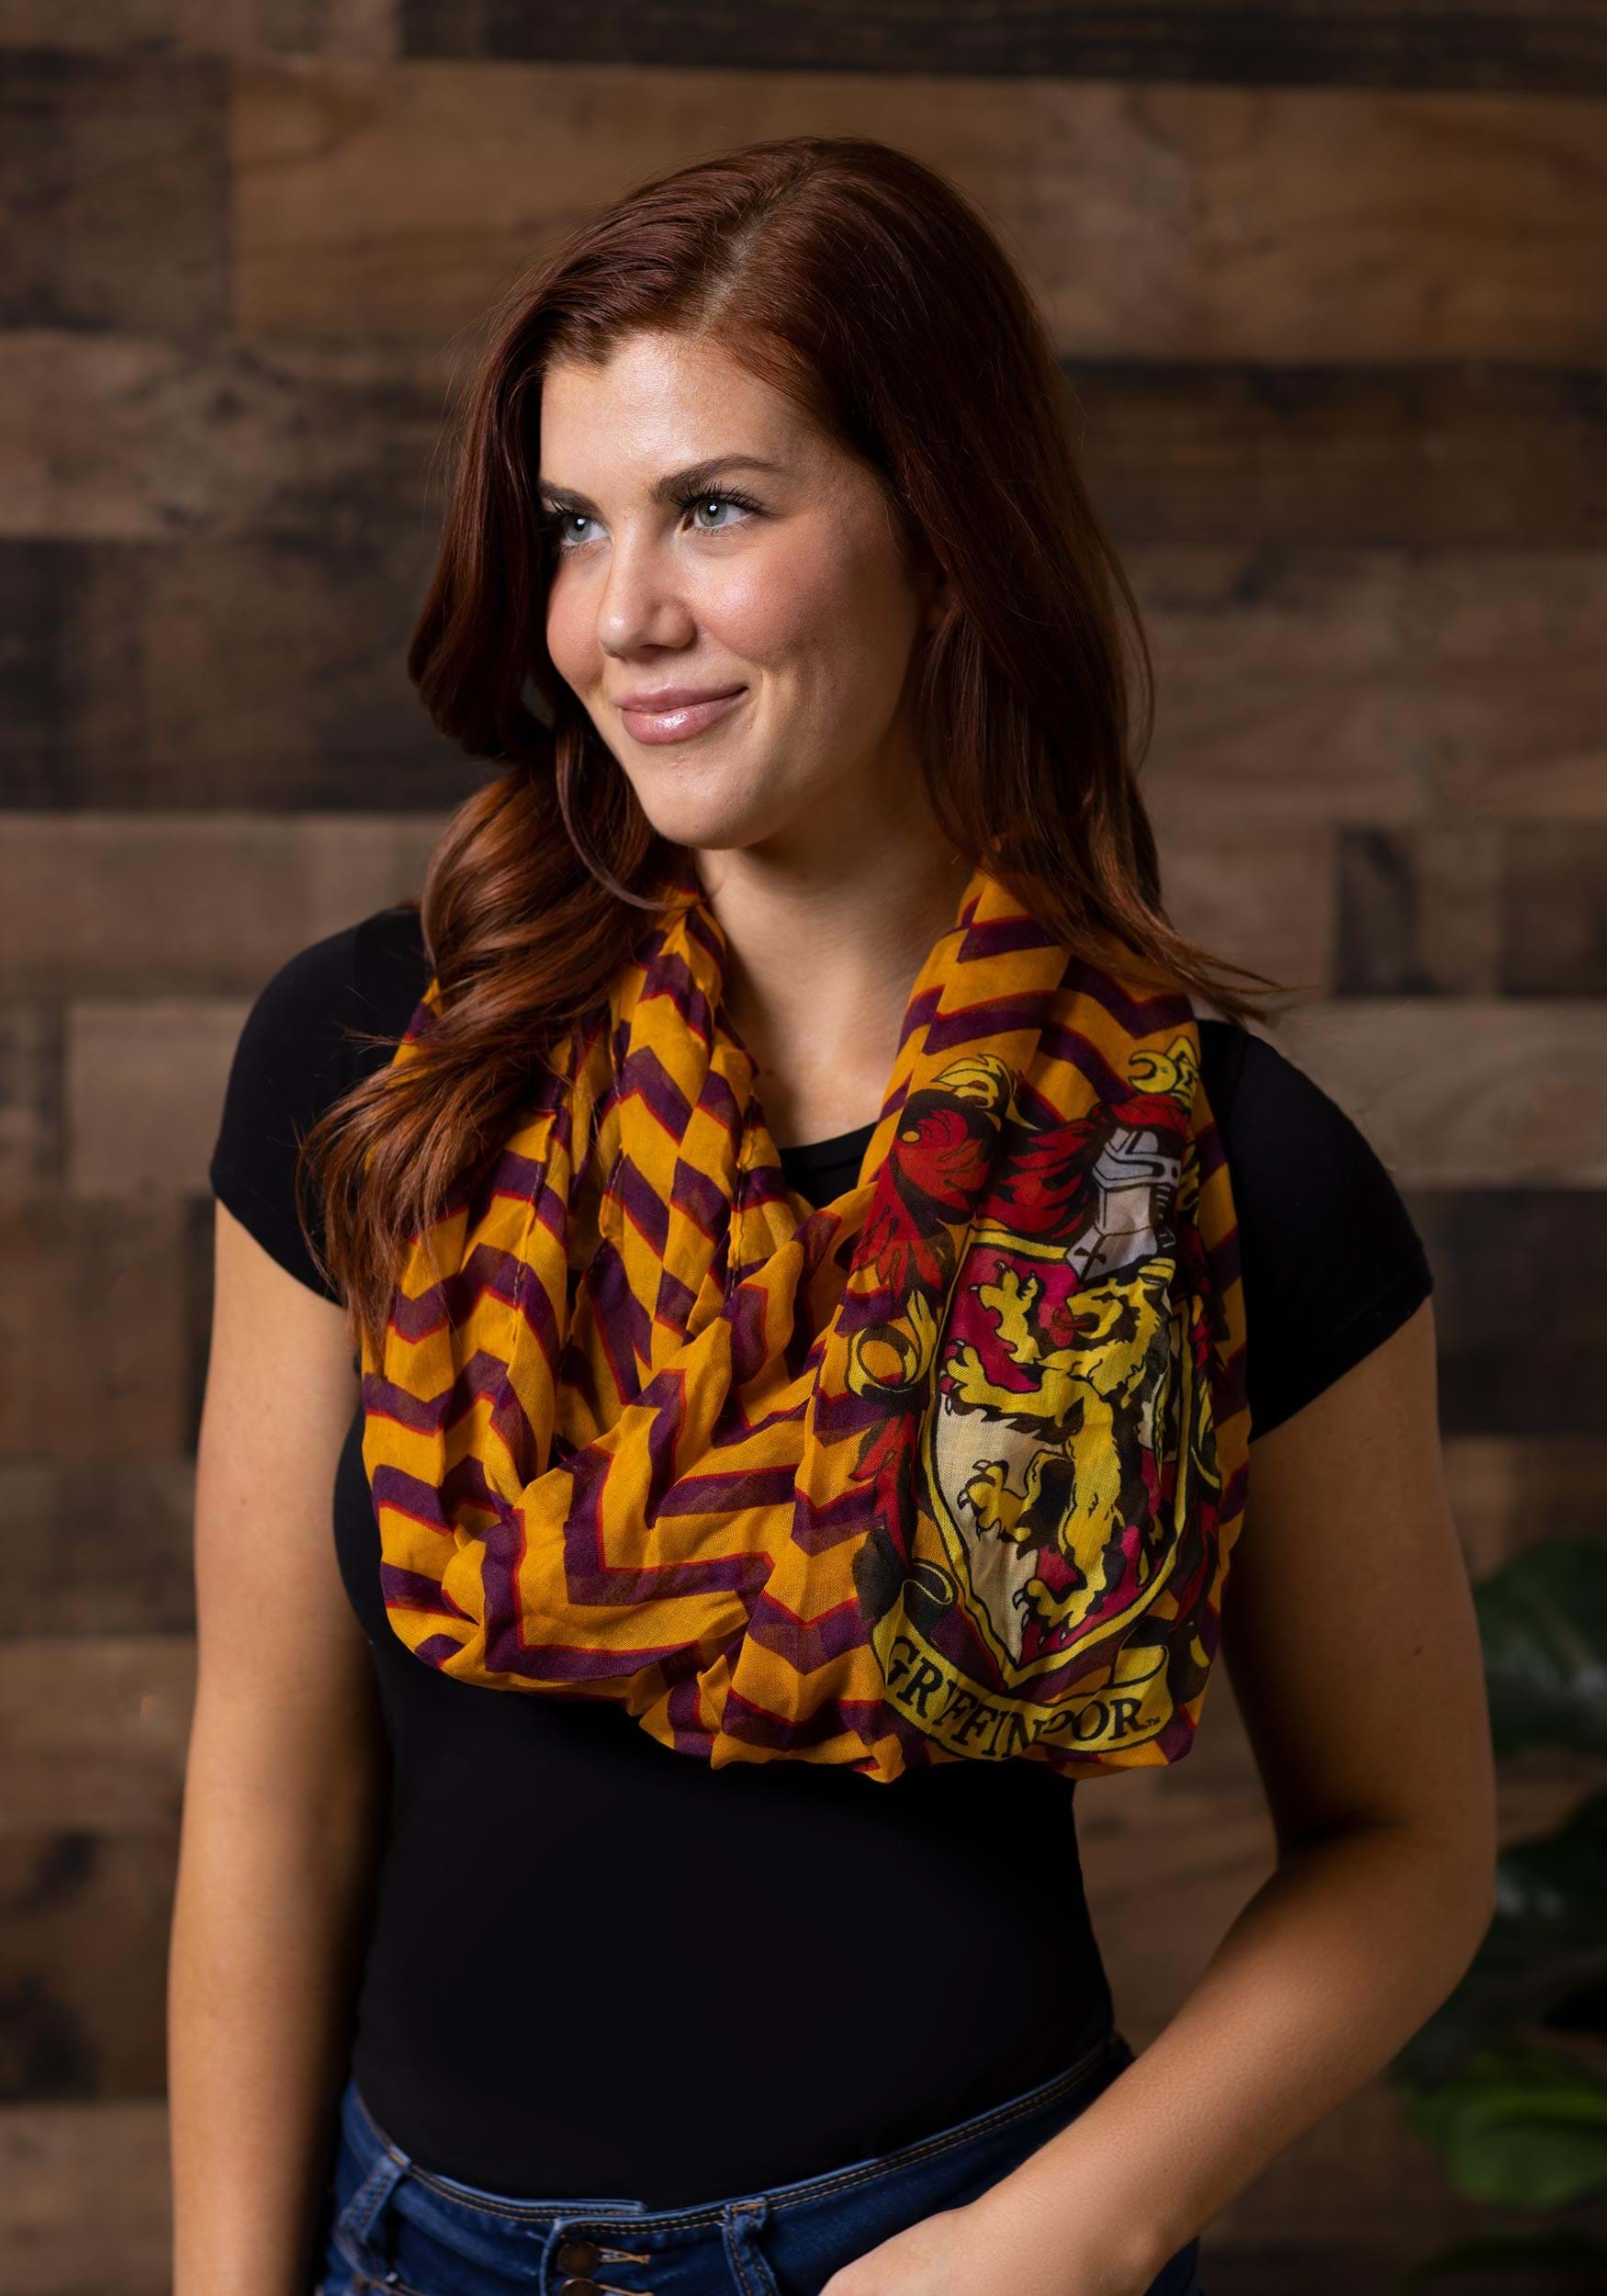 Gryffindor Infinity Scarf From Harry Potter